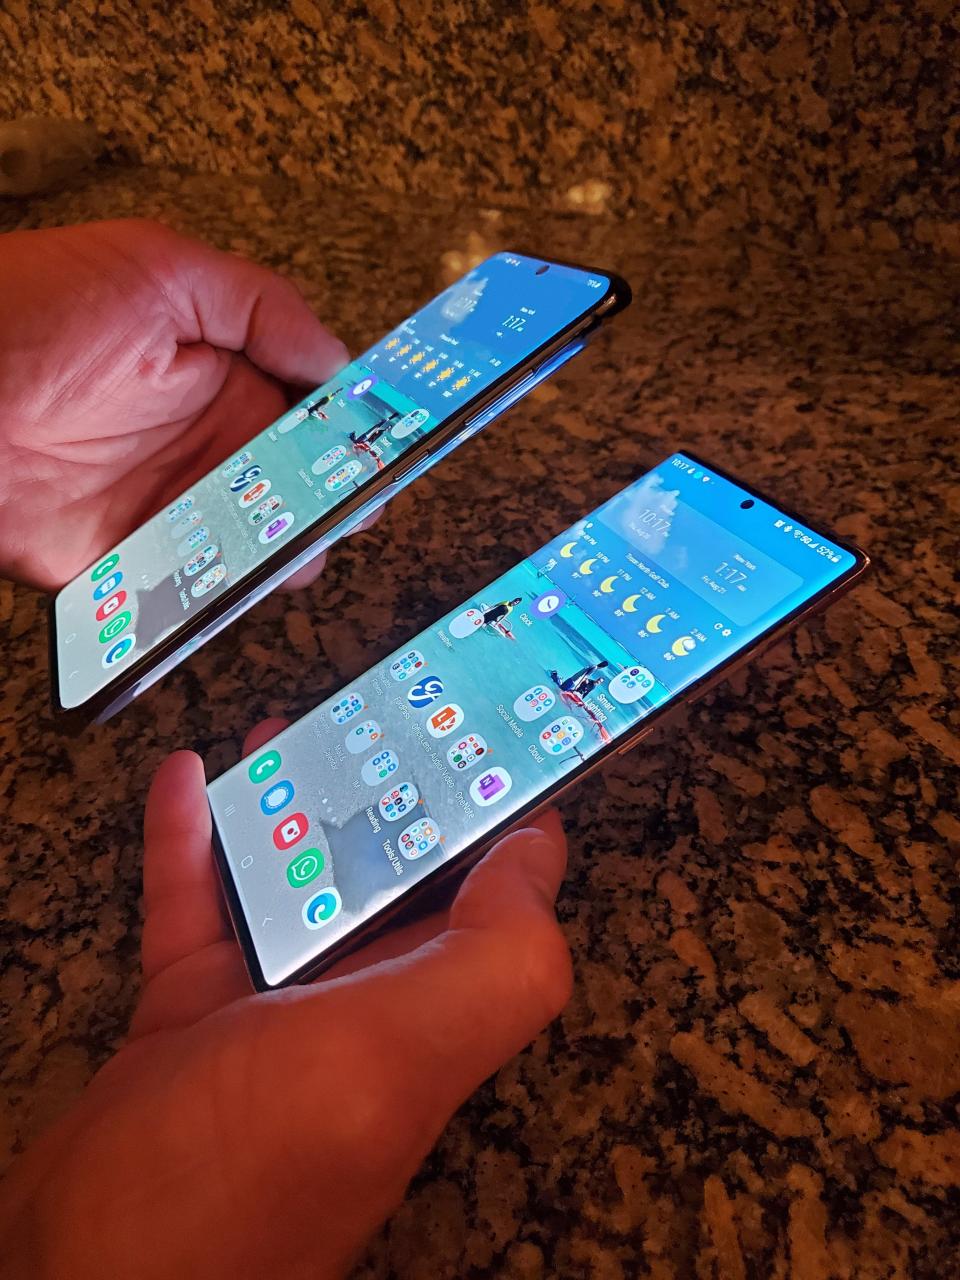 The Samsung Note20 Ultra (to the left below), compared to the Samsung S20 Ultra smartphone. The Note20 phablet is larger, but thinner and lighter than the smartphone.